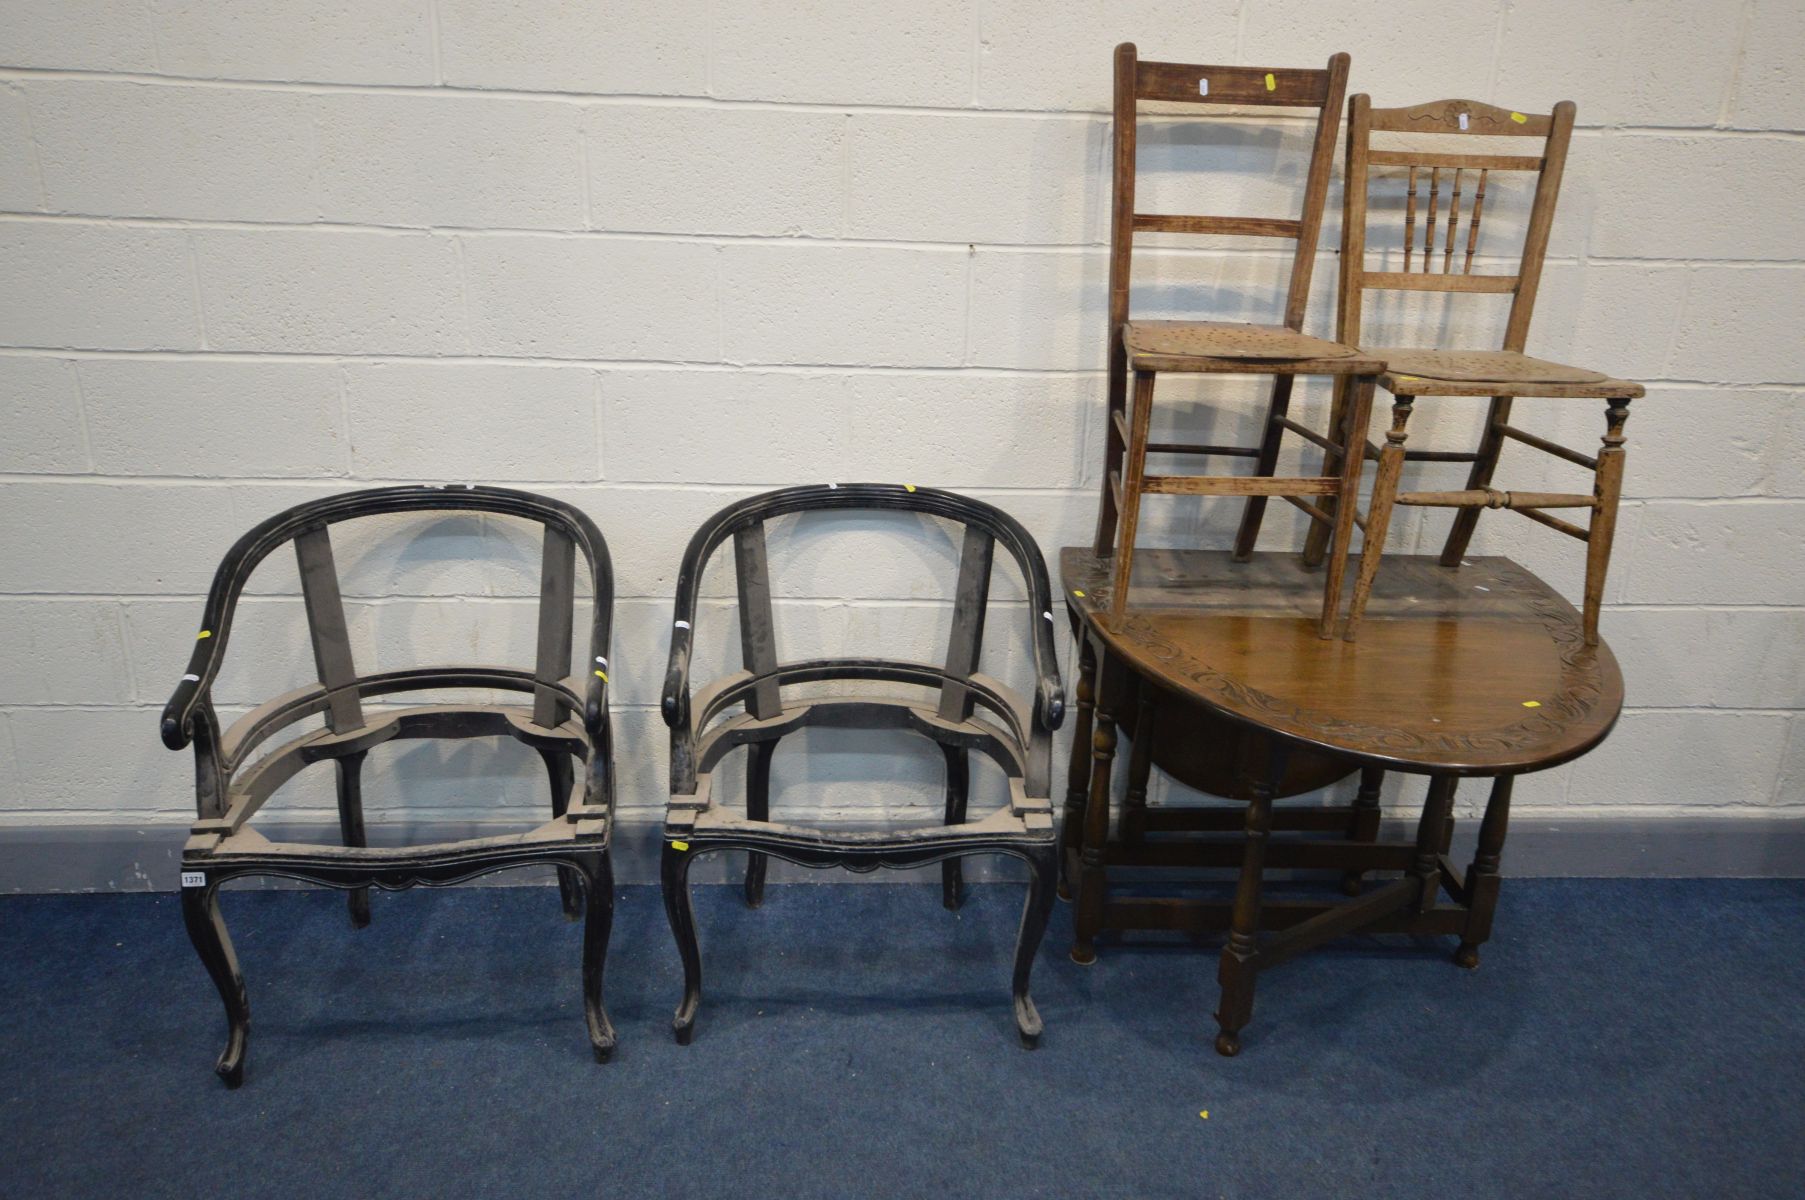 A PAIR OF EBONISED FRENCH STYLE TUB CHAIRS (no upholstery) along with an oak gate leg table and